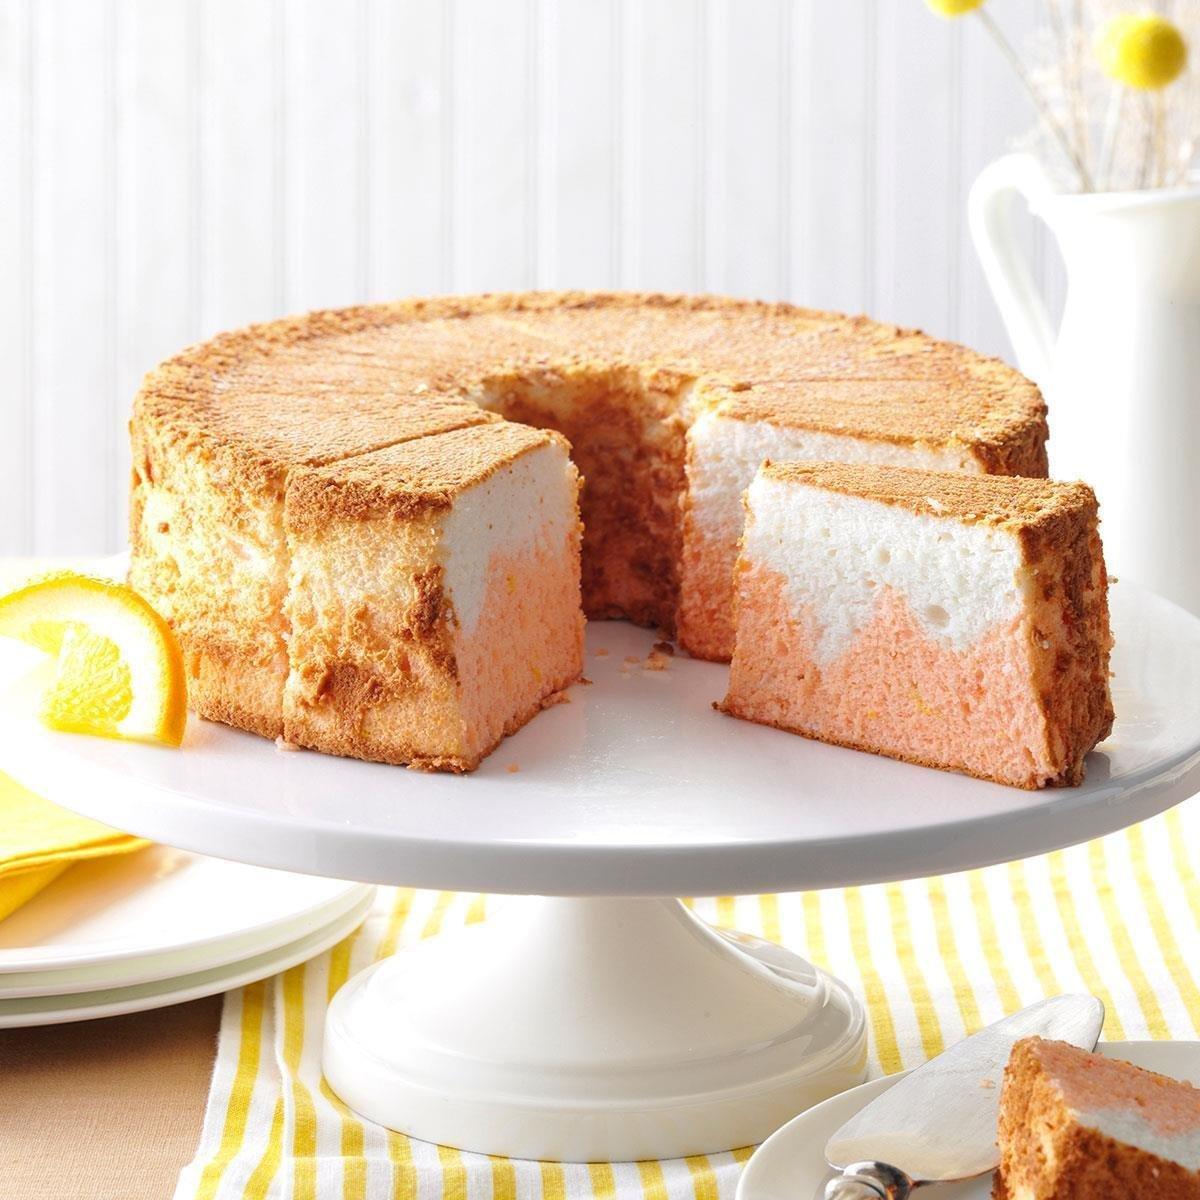 Is Angel Food Cake Good For A Diabetic?